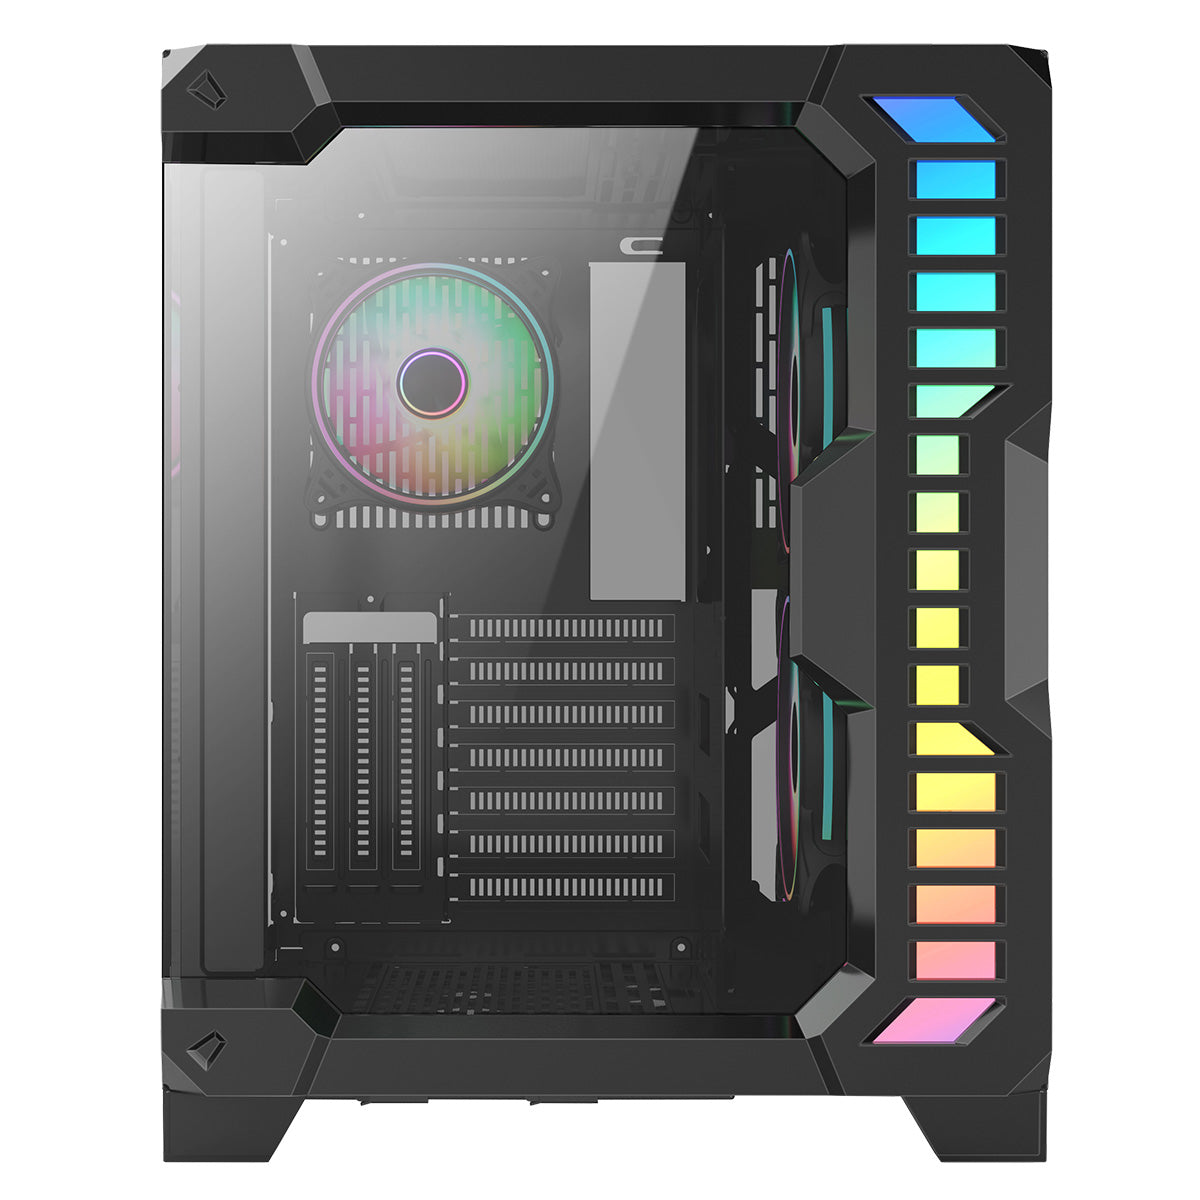 CiT Pro Android X ARGB Gaming PC Case With Tempered Glass Panels - Black